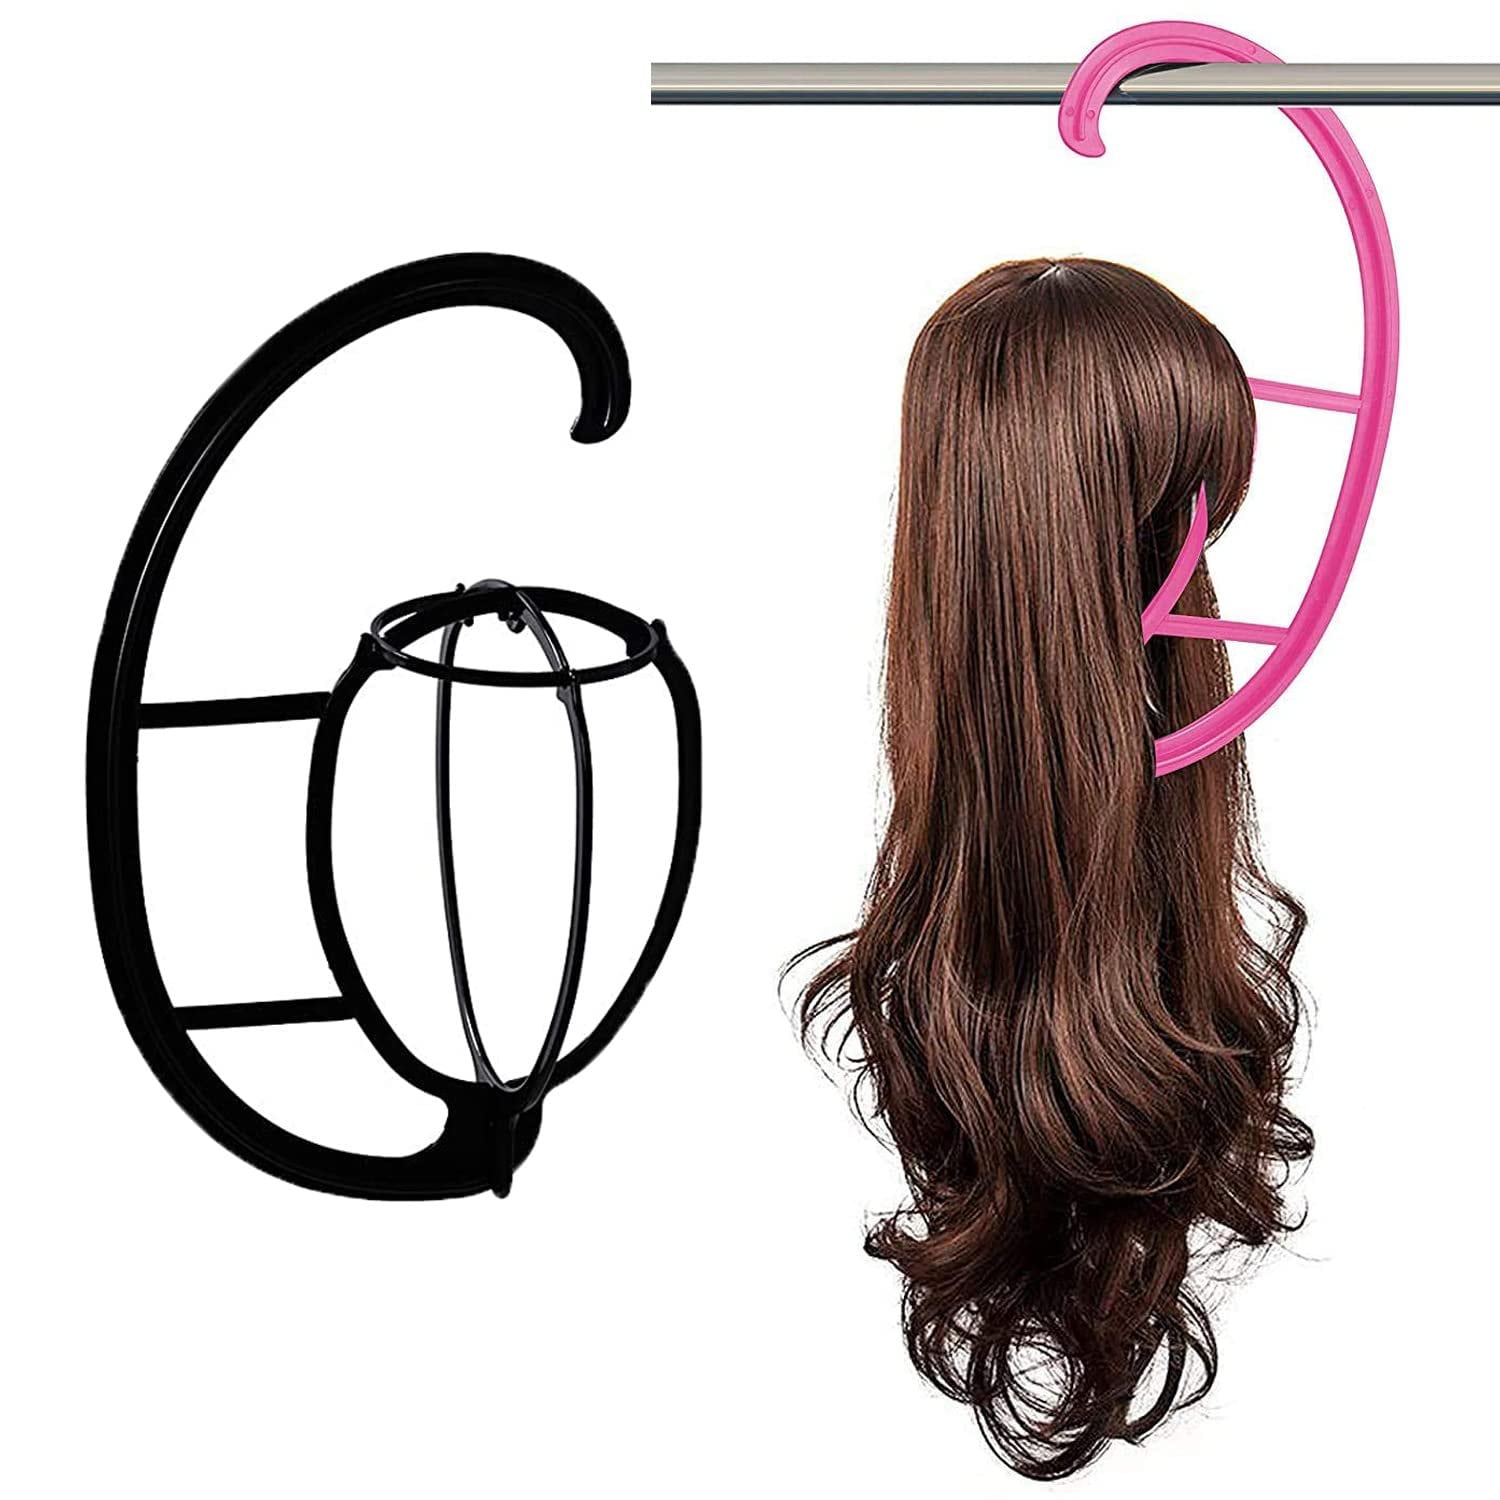 Collapsible Metal Wig Stand - Cancer & Chemotherapy Wig